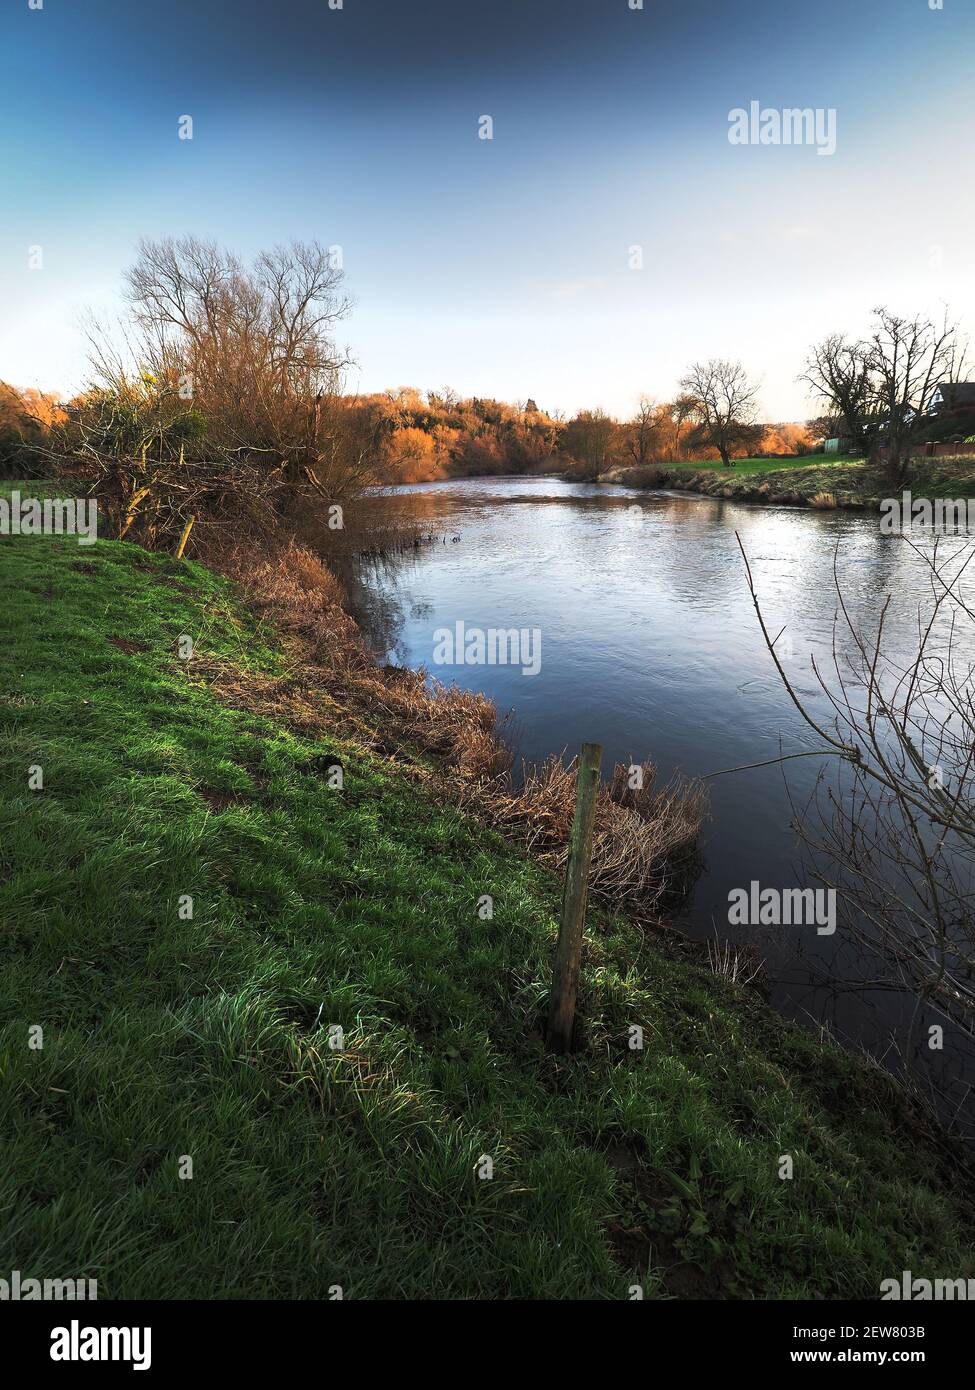 The River Wye at Stretton Sugwas and Breinton is picturesque in autumn sunshine. Stock Photo